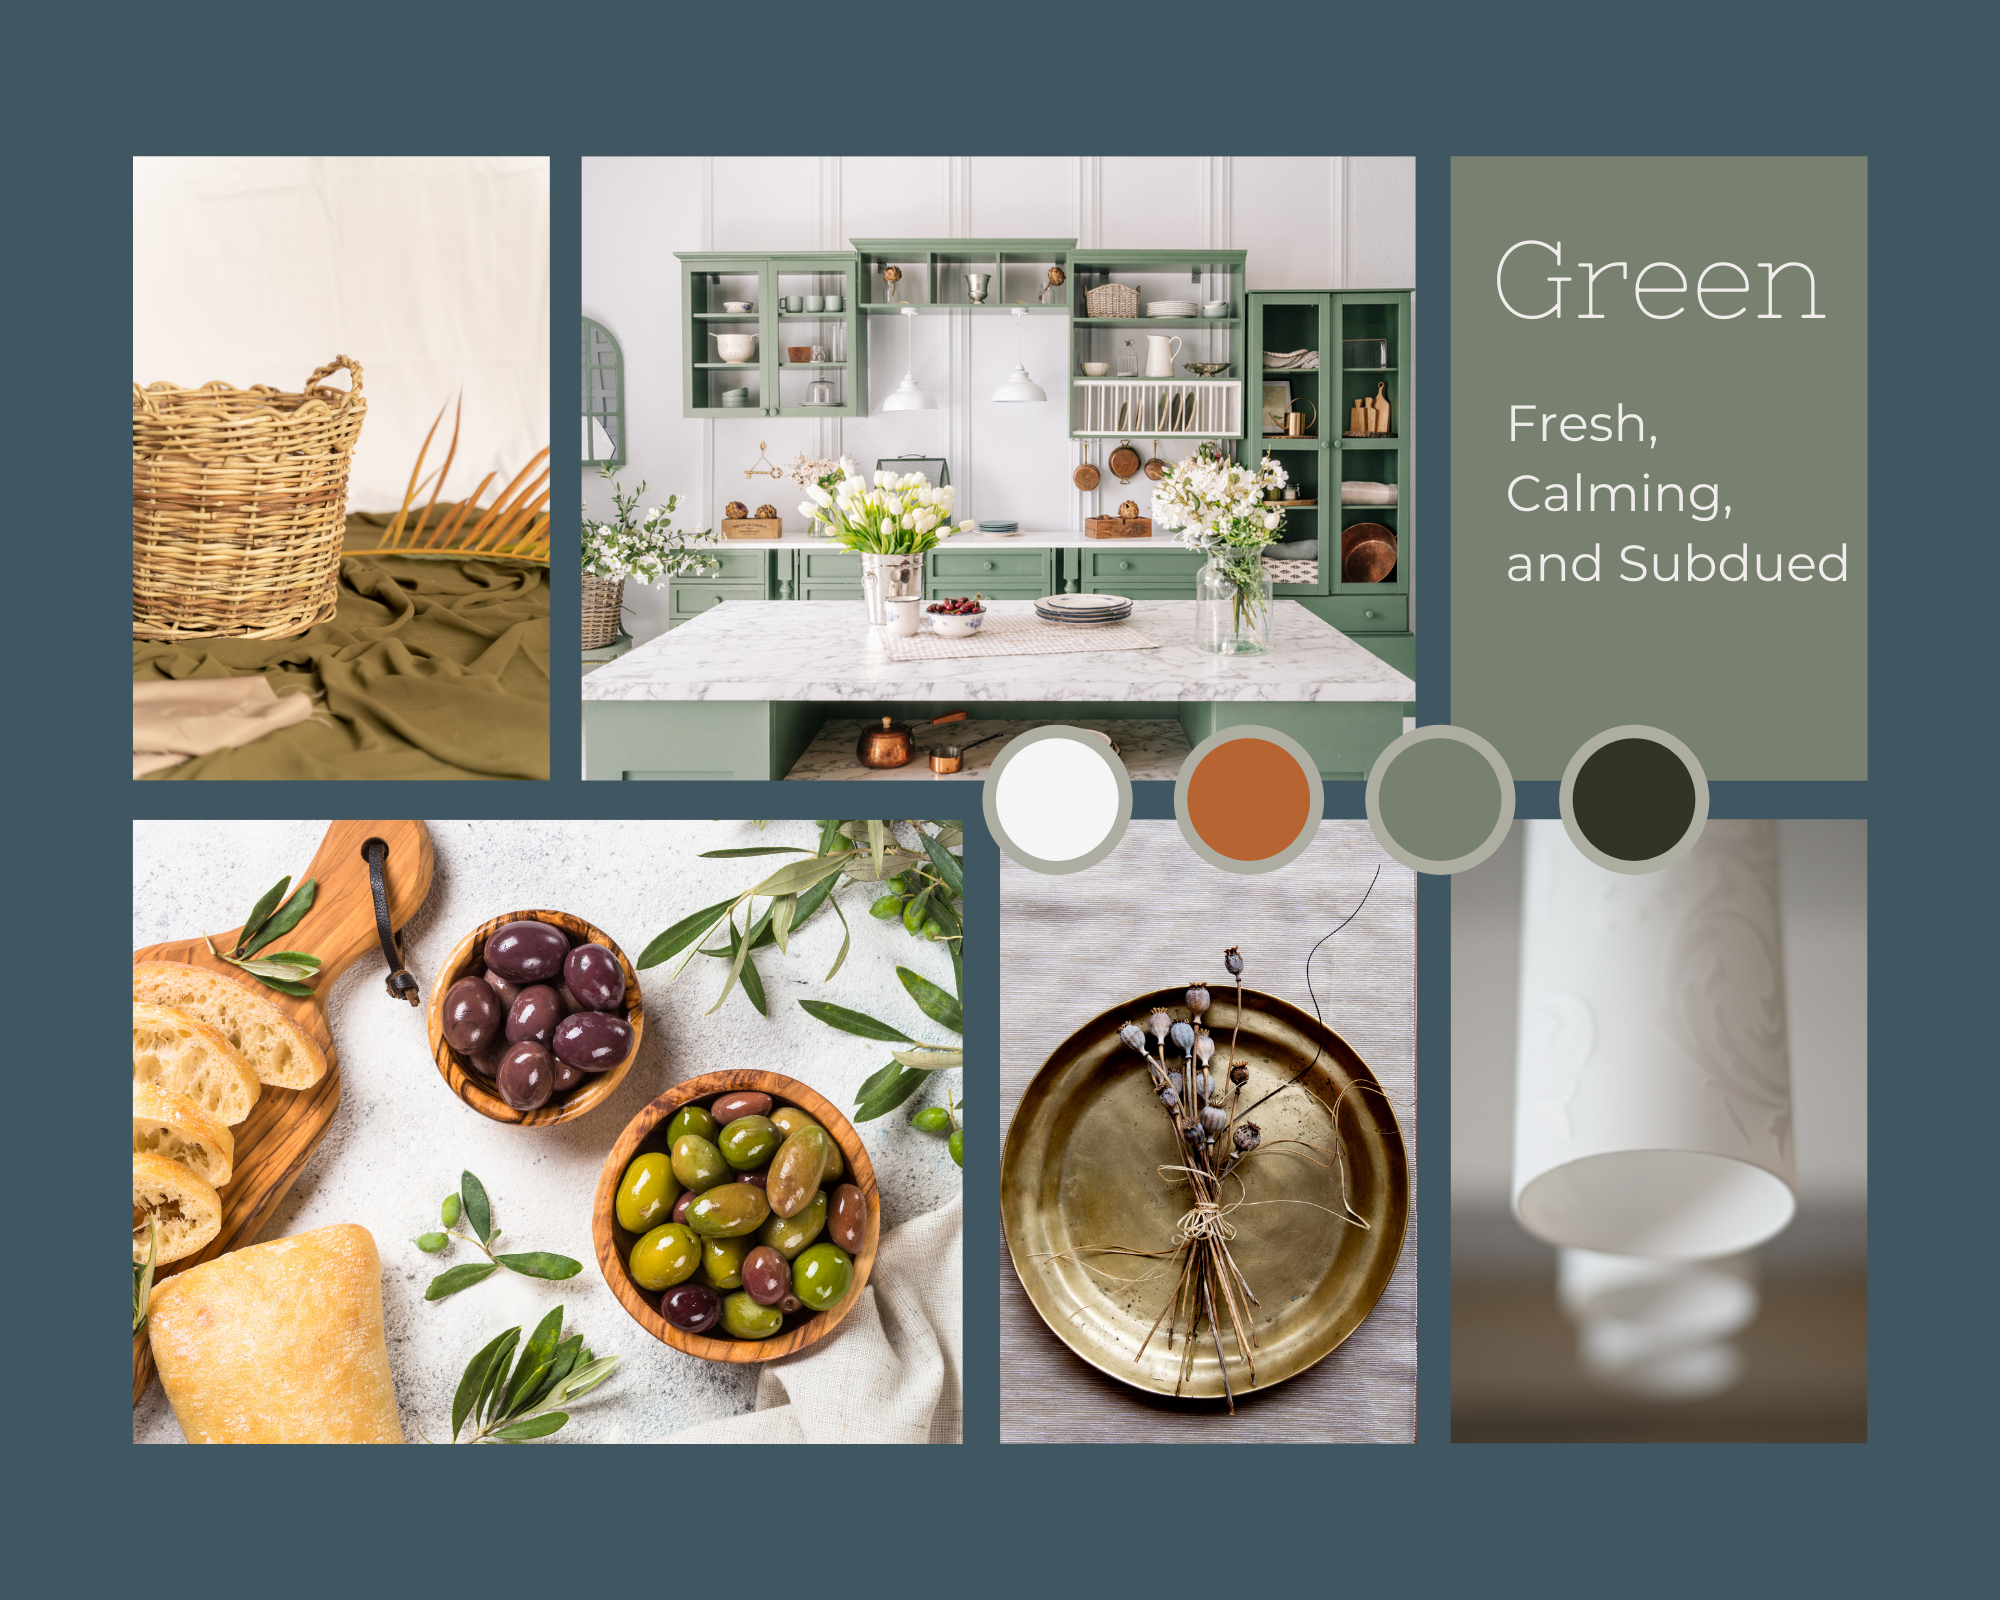 Green – Fresh, Calming, and Subdued